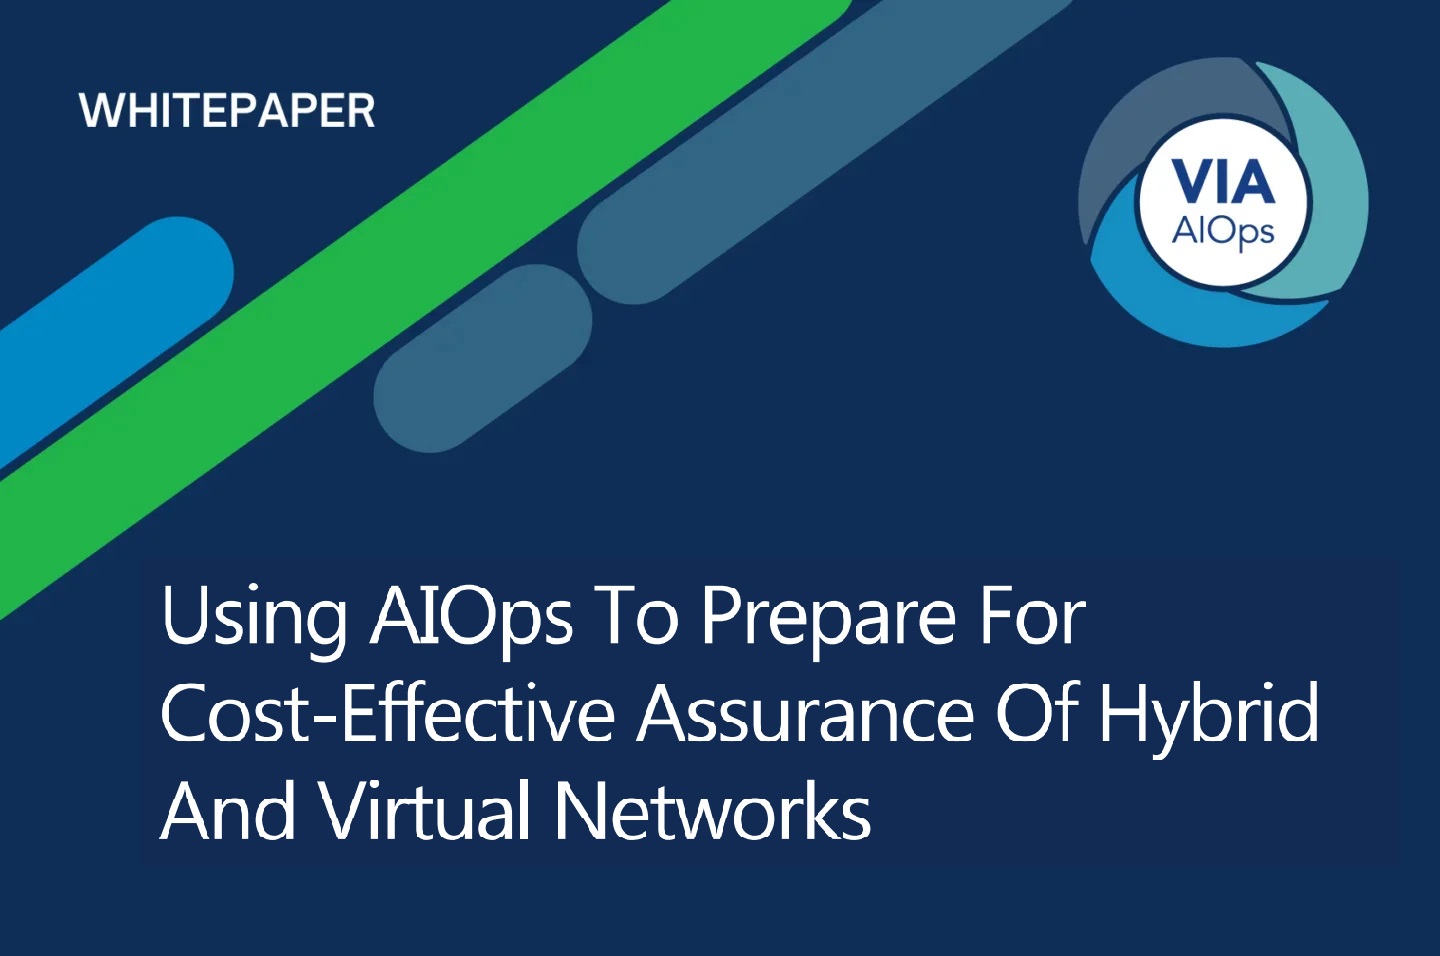 Using AIOps To Prepare For Cost-Effective Assurance Of Hybrid And Virtual Networks